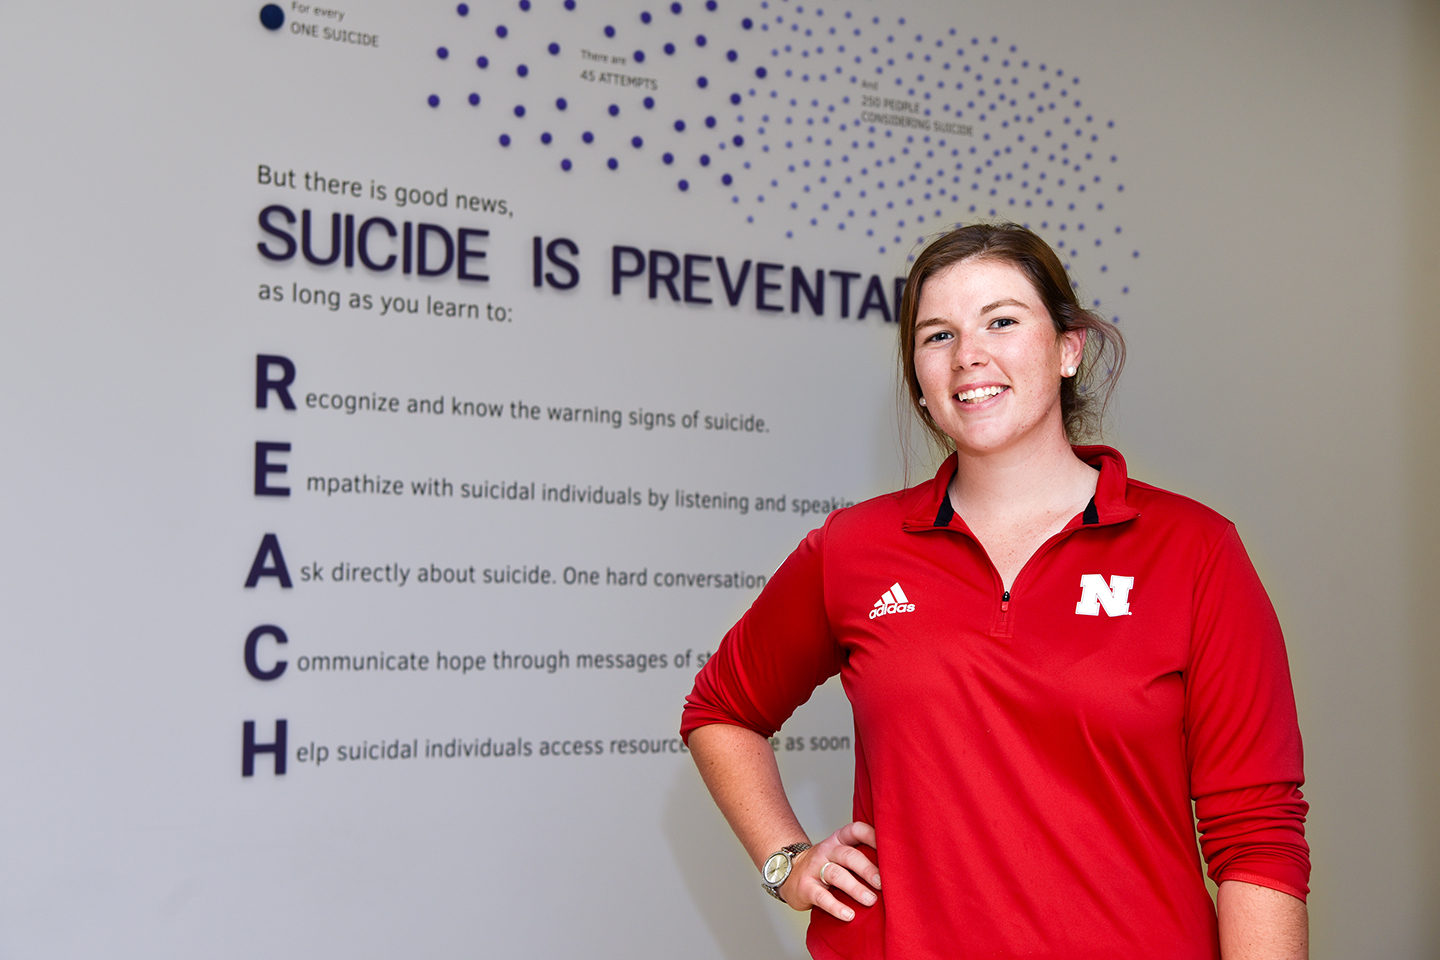 Kate Smith, senior graphic design major from Detroit Lakes, Minnesota, used her artistic talents and background working in mental health to create a display highlighting the importance of suicide prevention and spread the message that even one conversatio